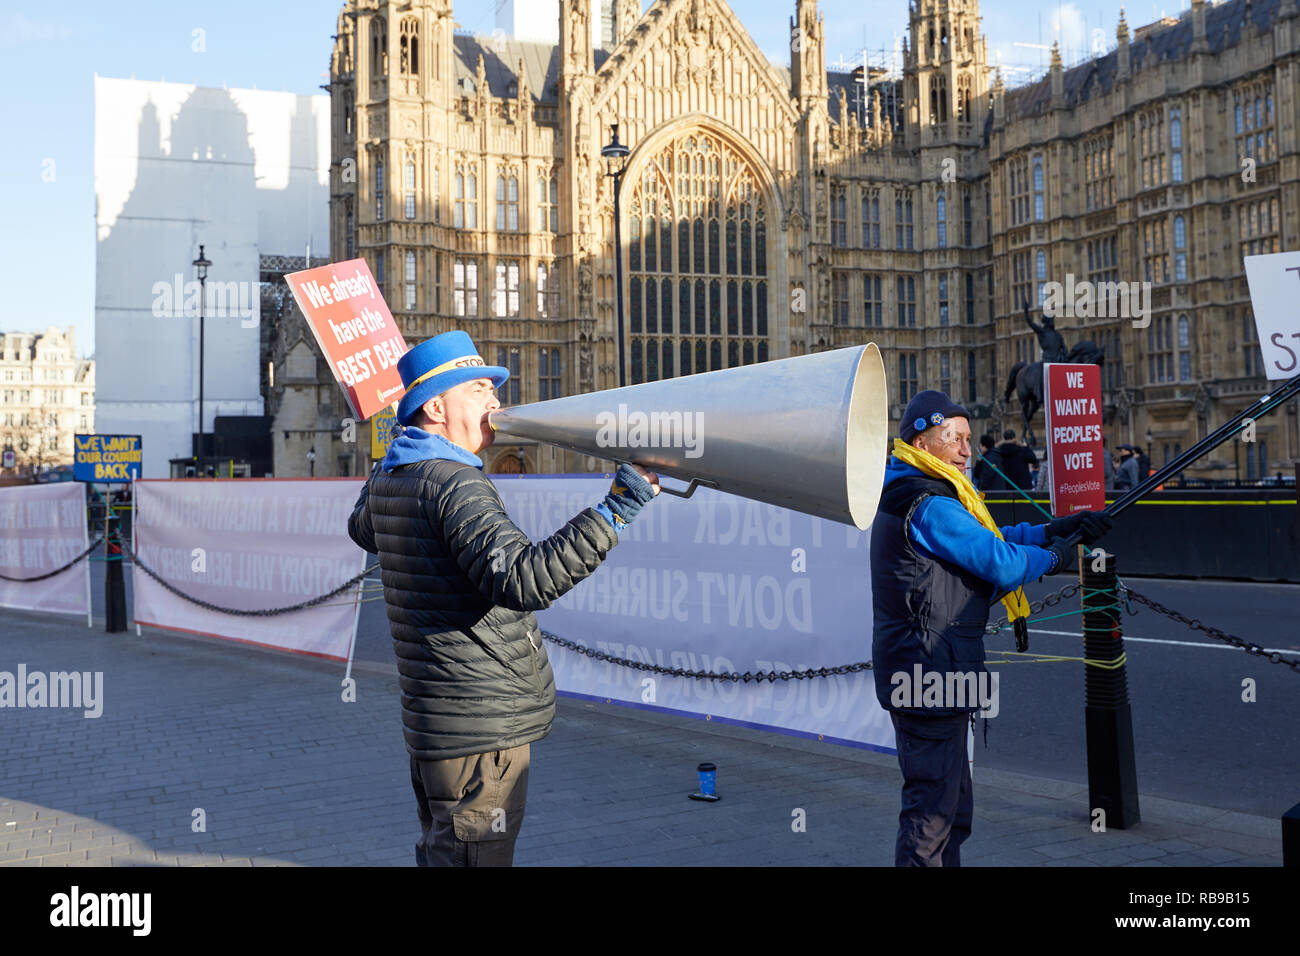 London, UK. 8th Jan, 2019. Brexit campaigners protest opposite Parliament days before a crucial vote on the Bexit deal in the House of Commons. Credit: Kevin J. Frost/Alamy Live News Stock Photo